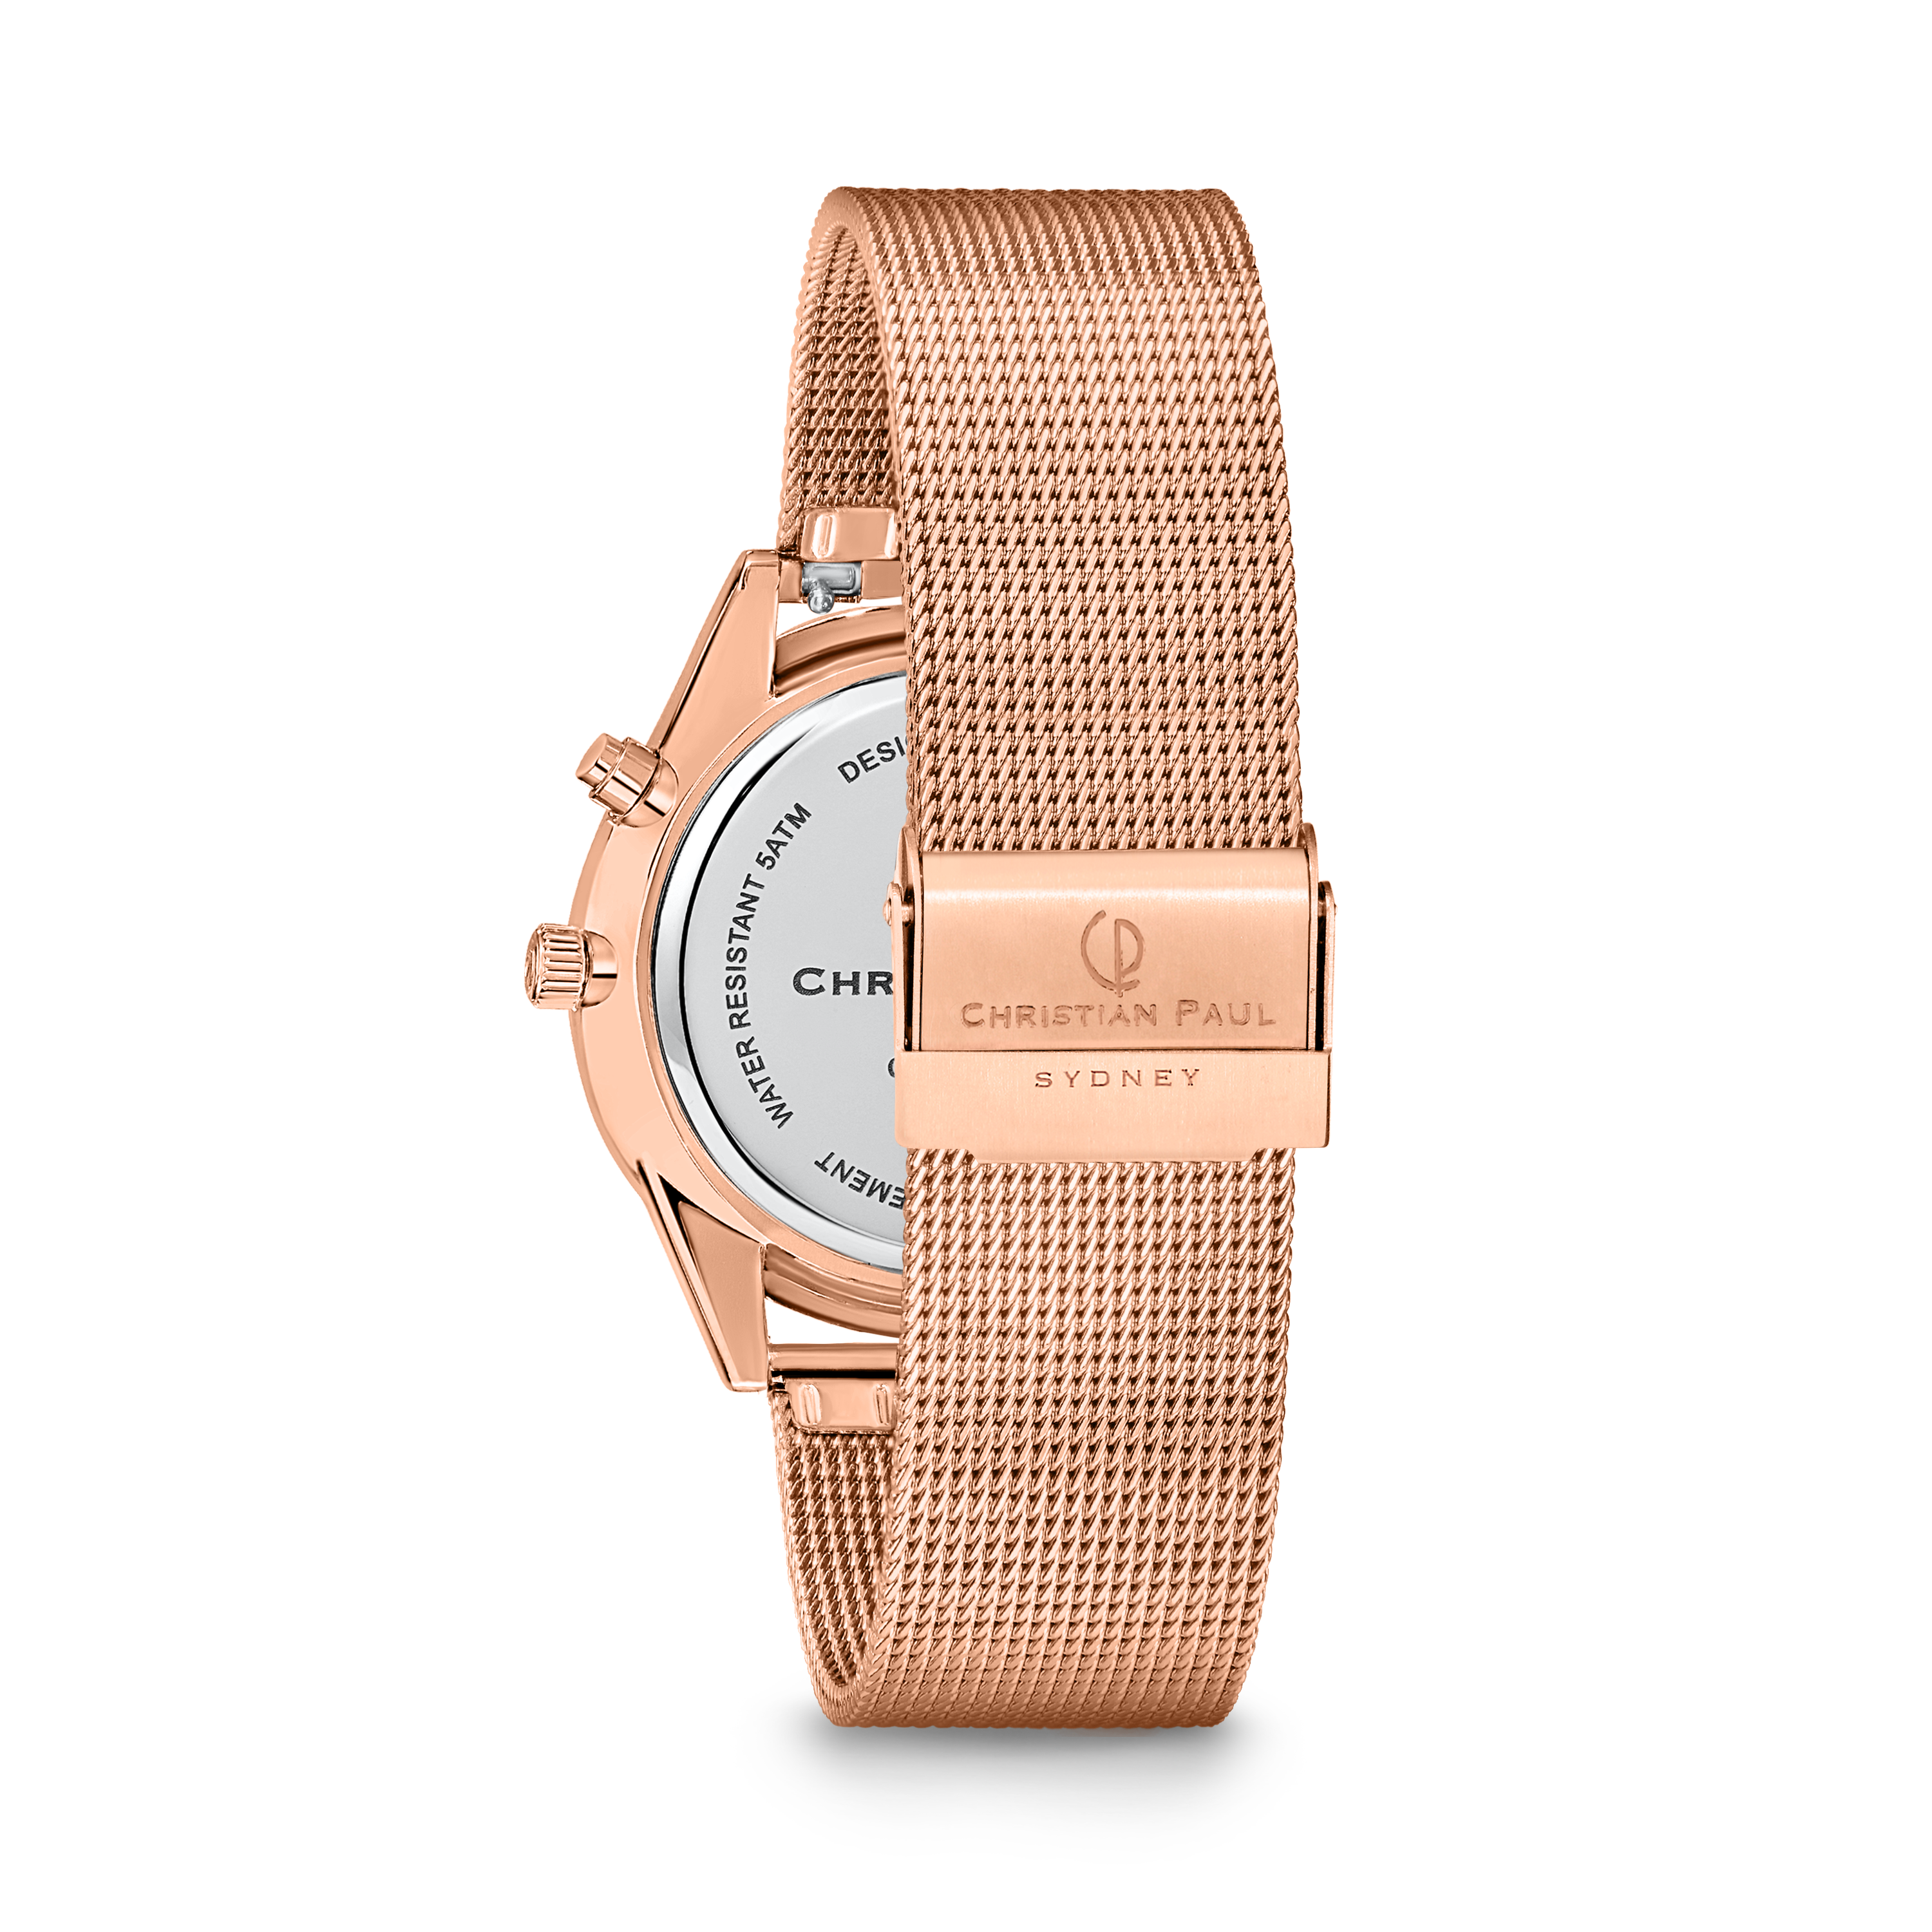 Luxury black and rose gold dial rose gold mesh link watch